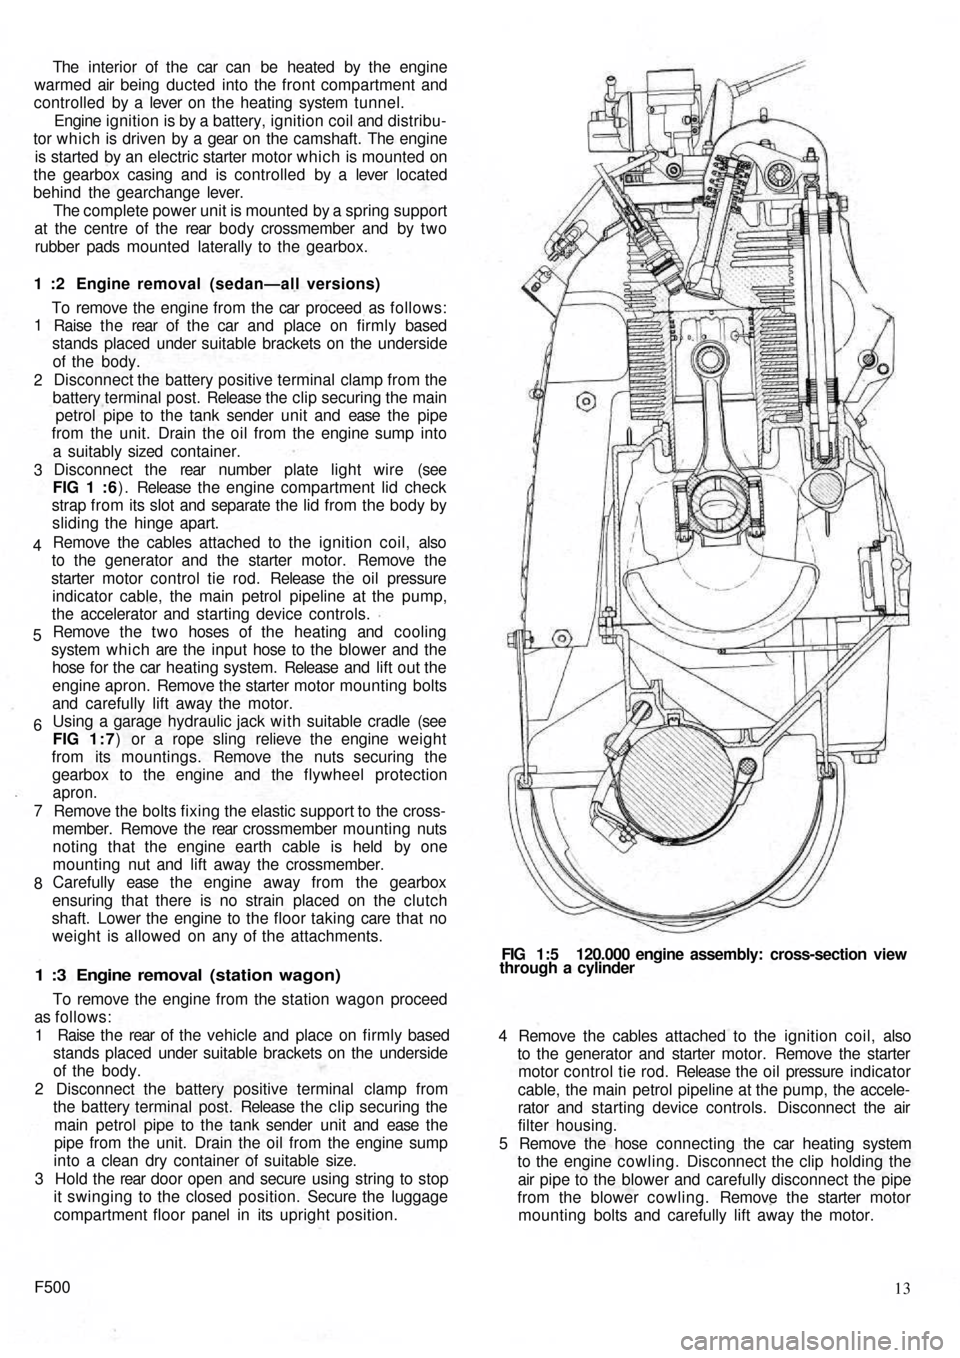 FIAT 500 1968 1.G Workshop Manual The  interior of the  car can  be heated by the engine
warmed air being ducted into the front compartment and
controlled  by a  lever on the heating system tunnel.
Engine ignition is by a battery, ign